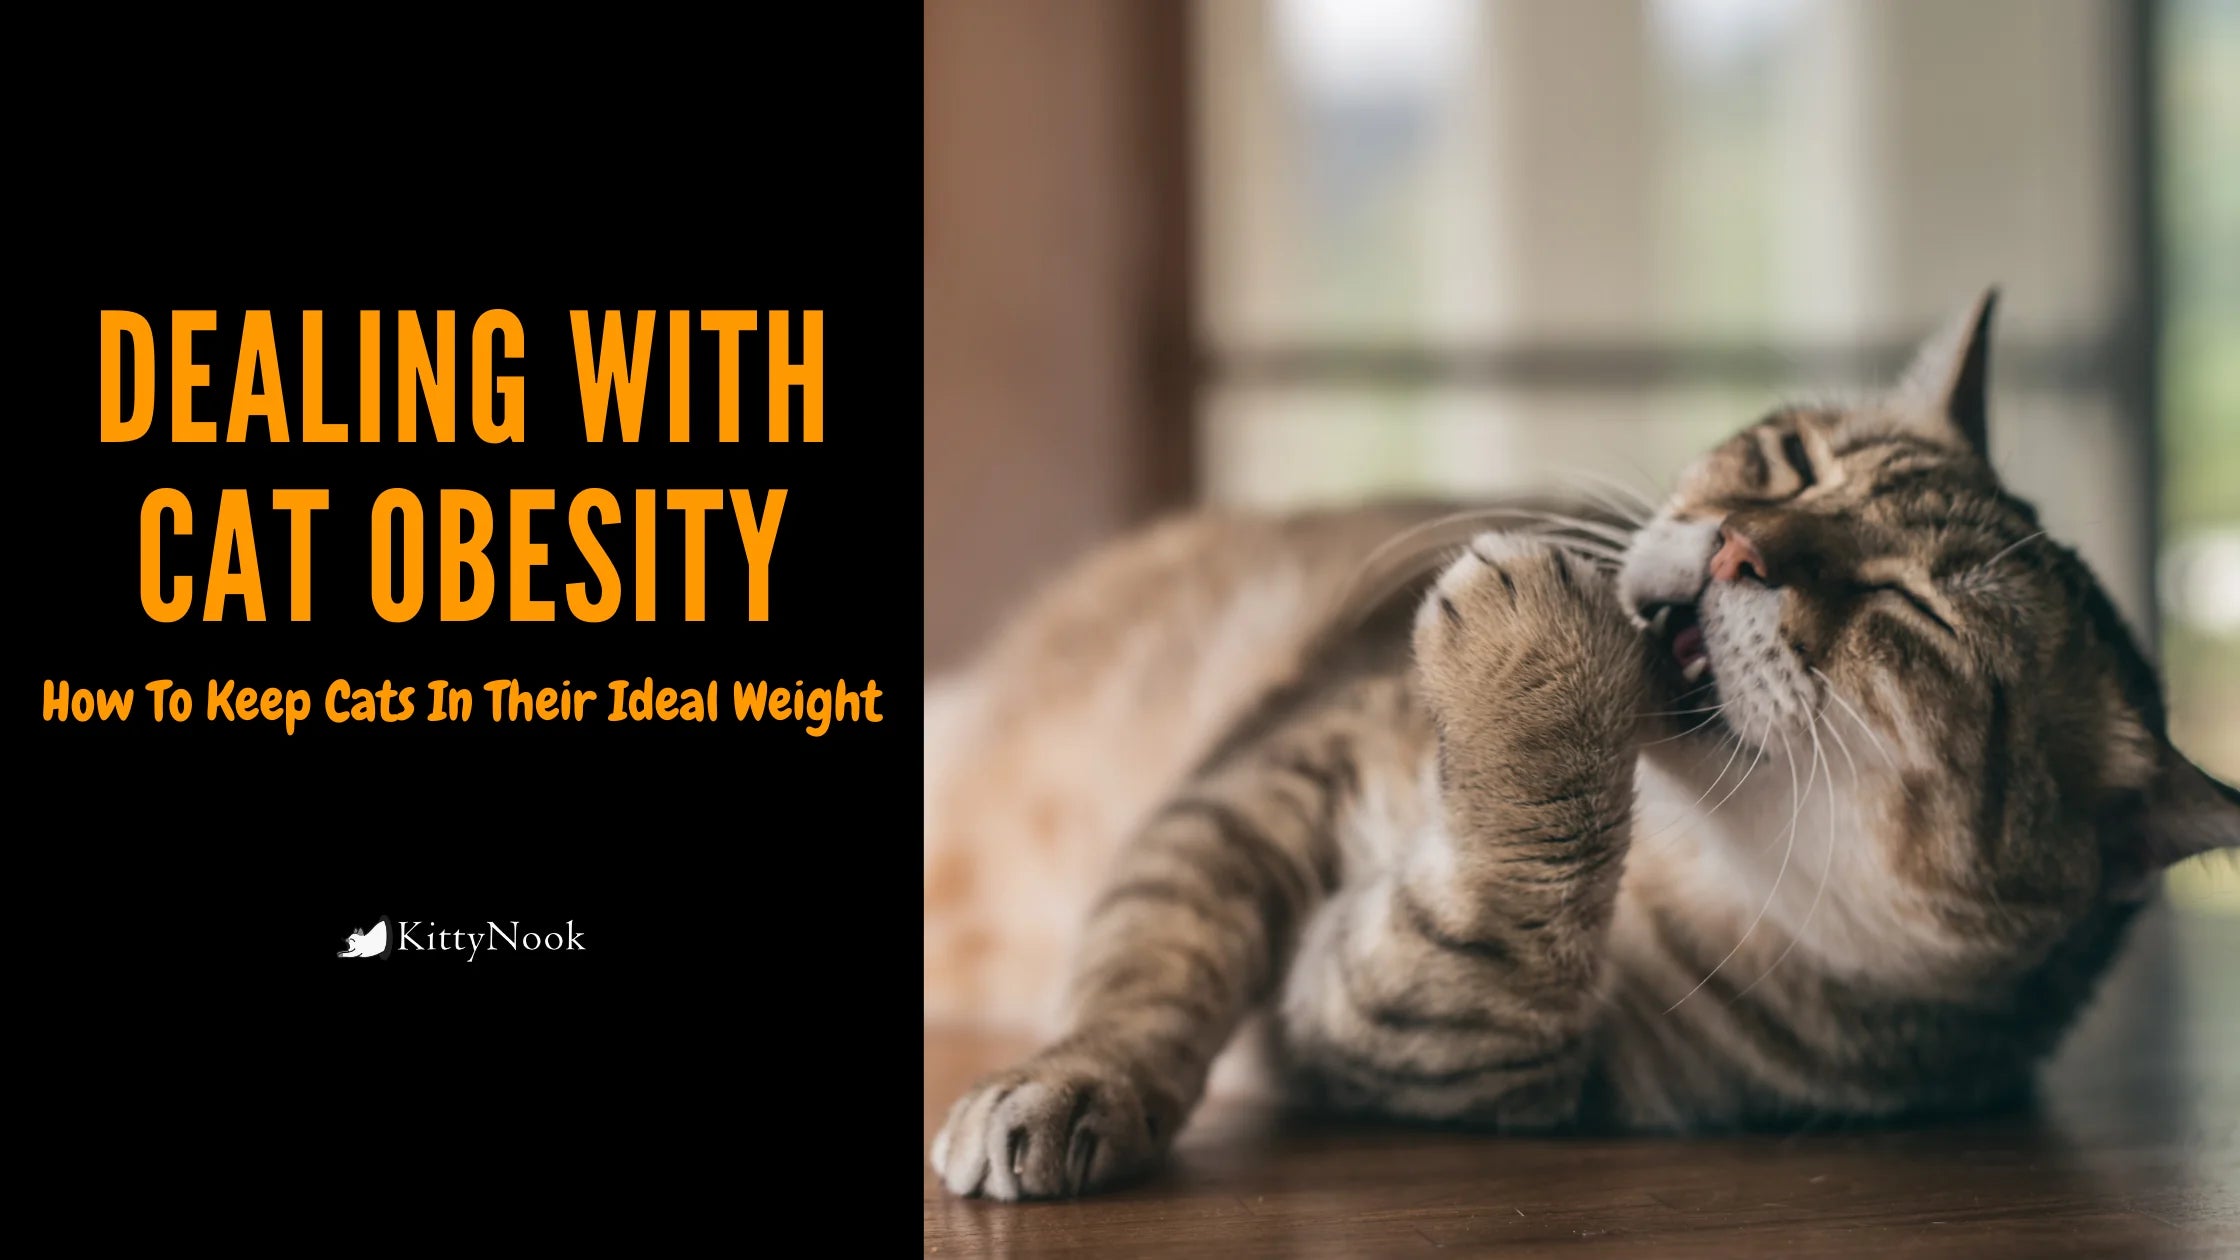 Dealing With Cat Obesity: How To Keep Cats In Their Ideal Weight - KittyNook Cat Company